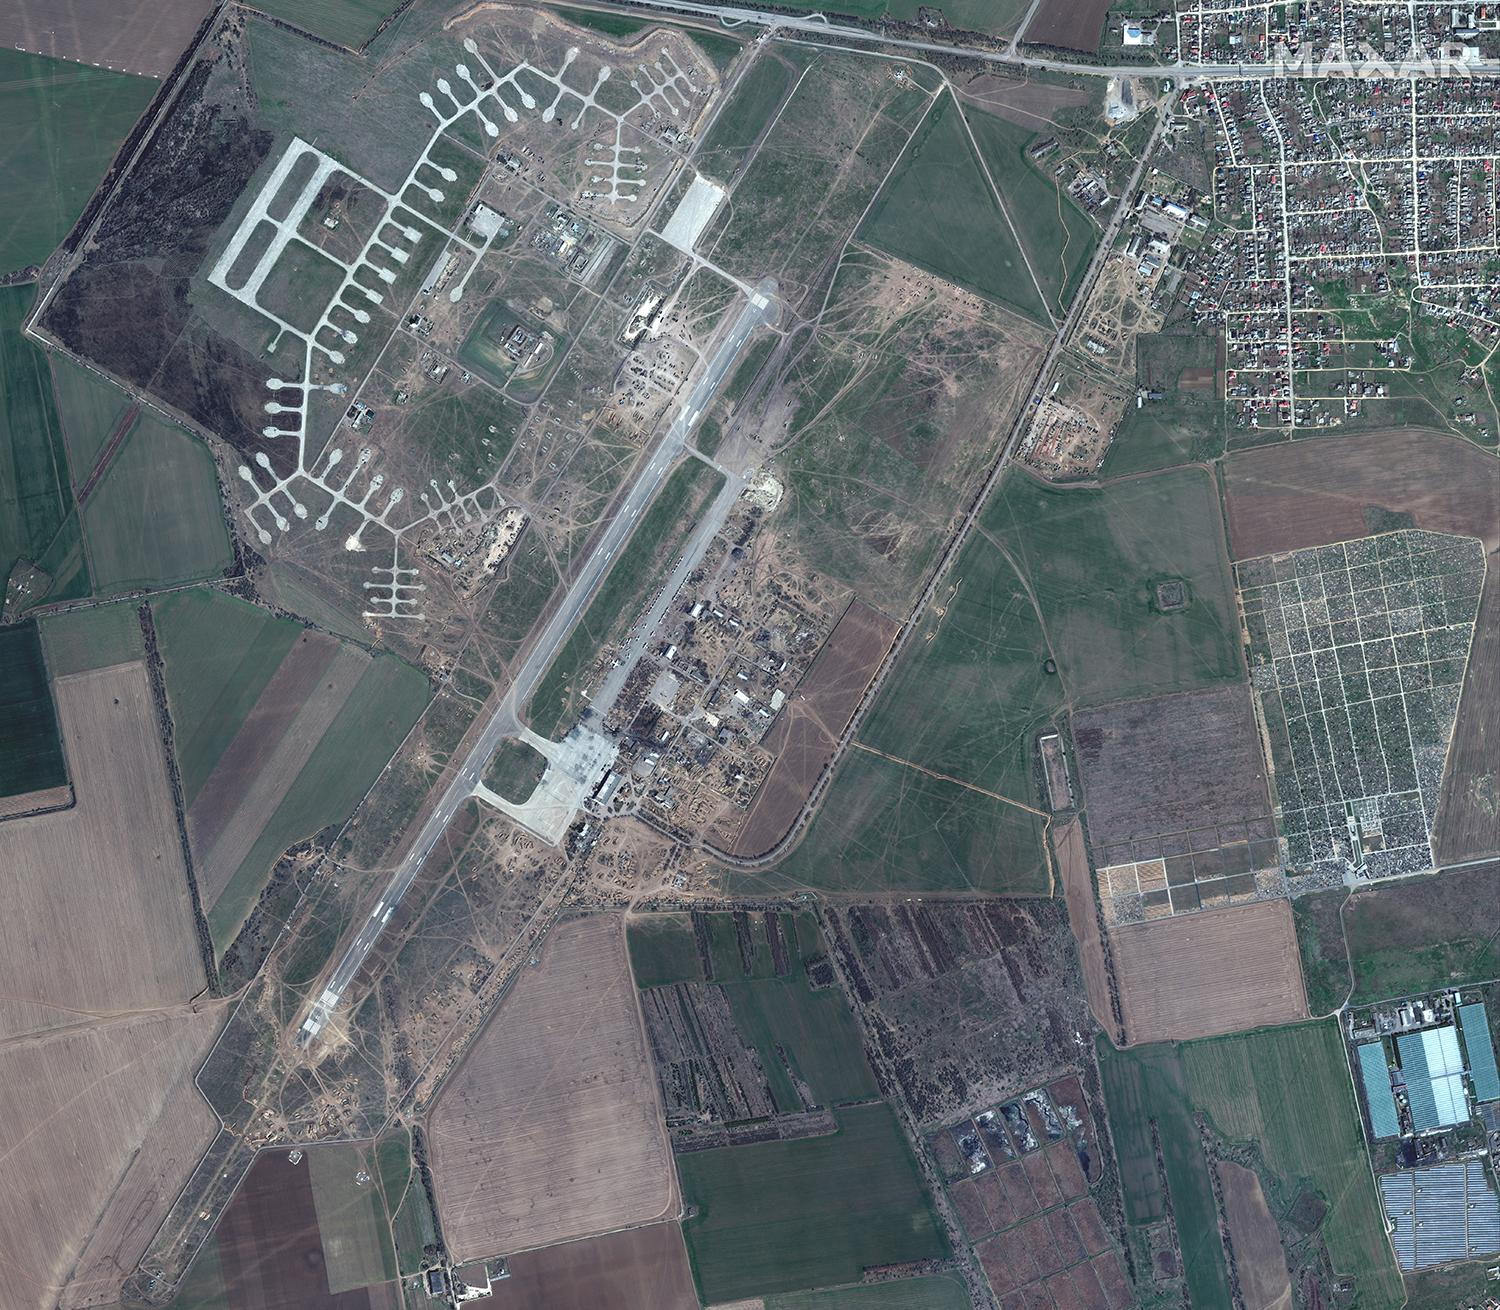 Maxar satellite imagery overview of Kherson Airfield and deployments in Kherson, Ukraine, on April 7.